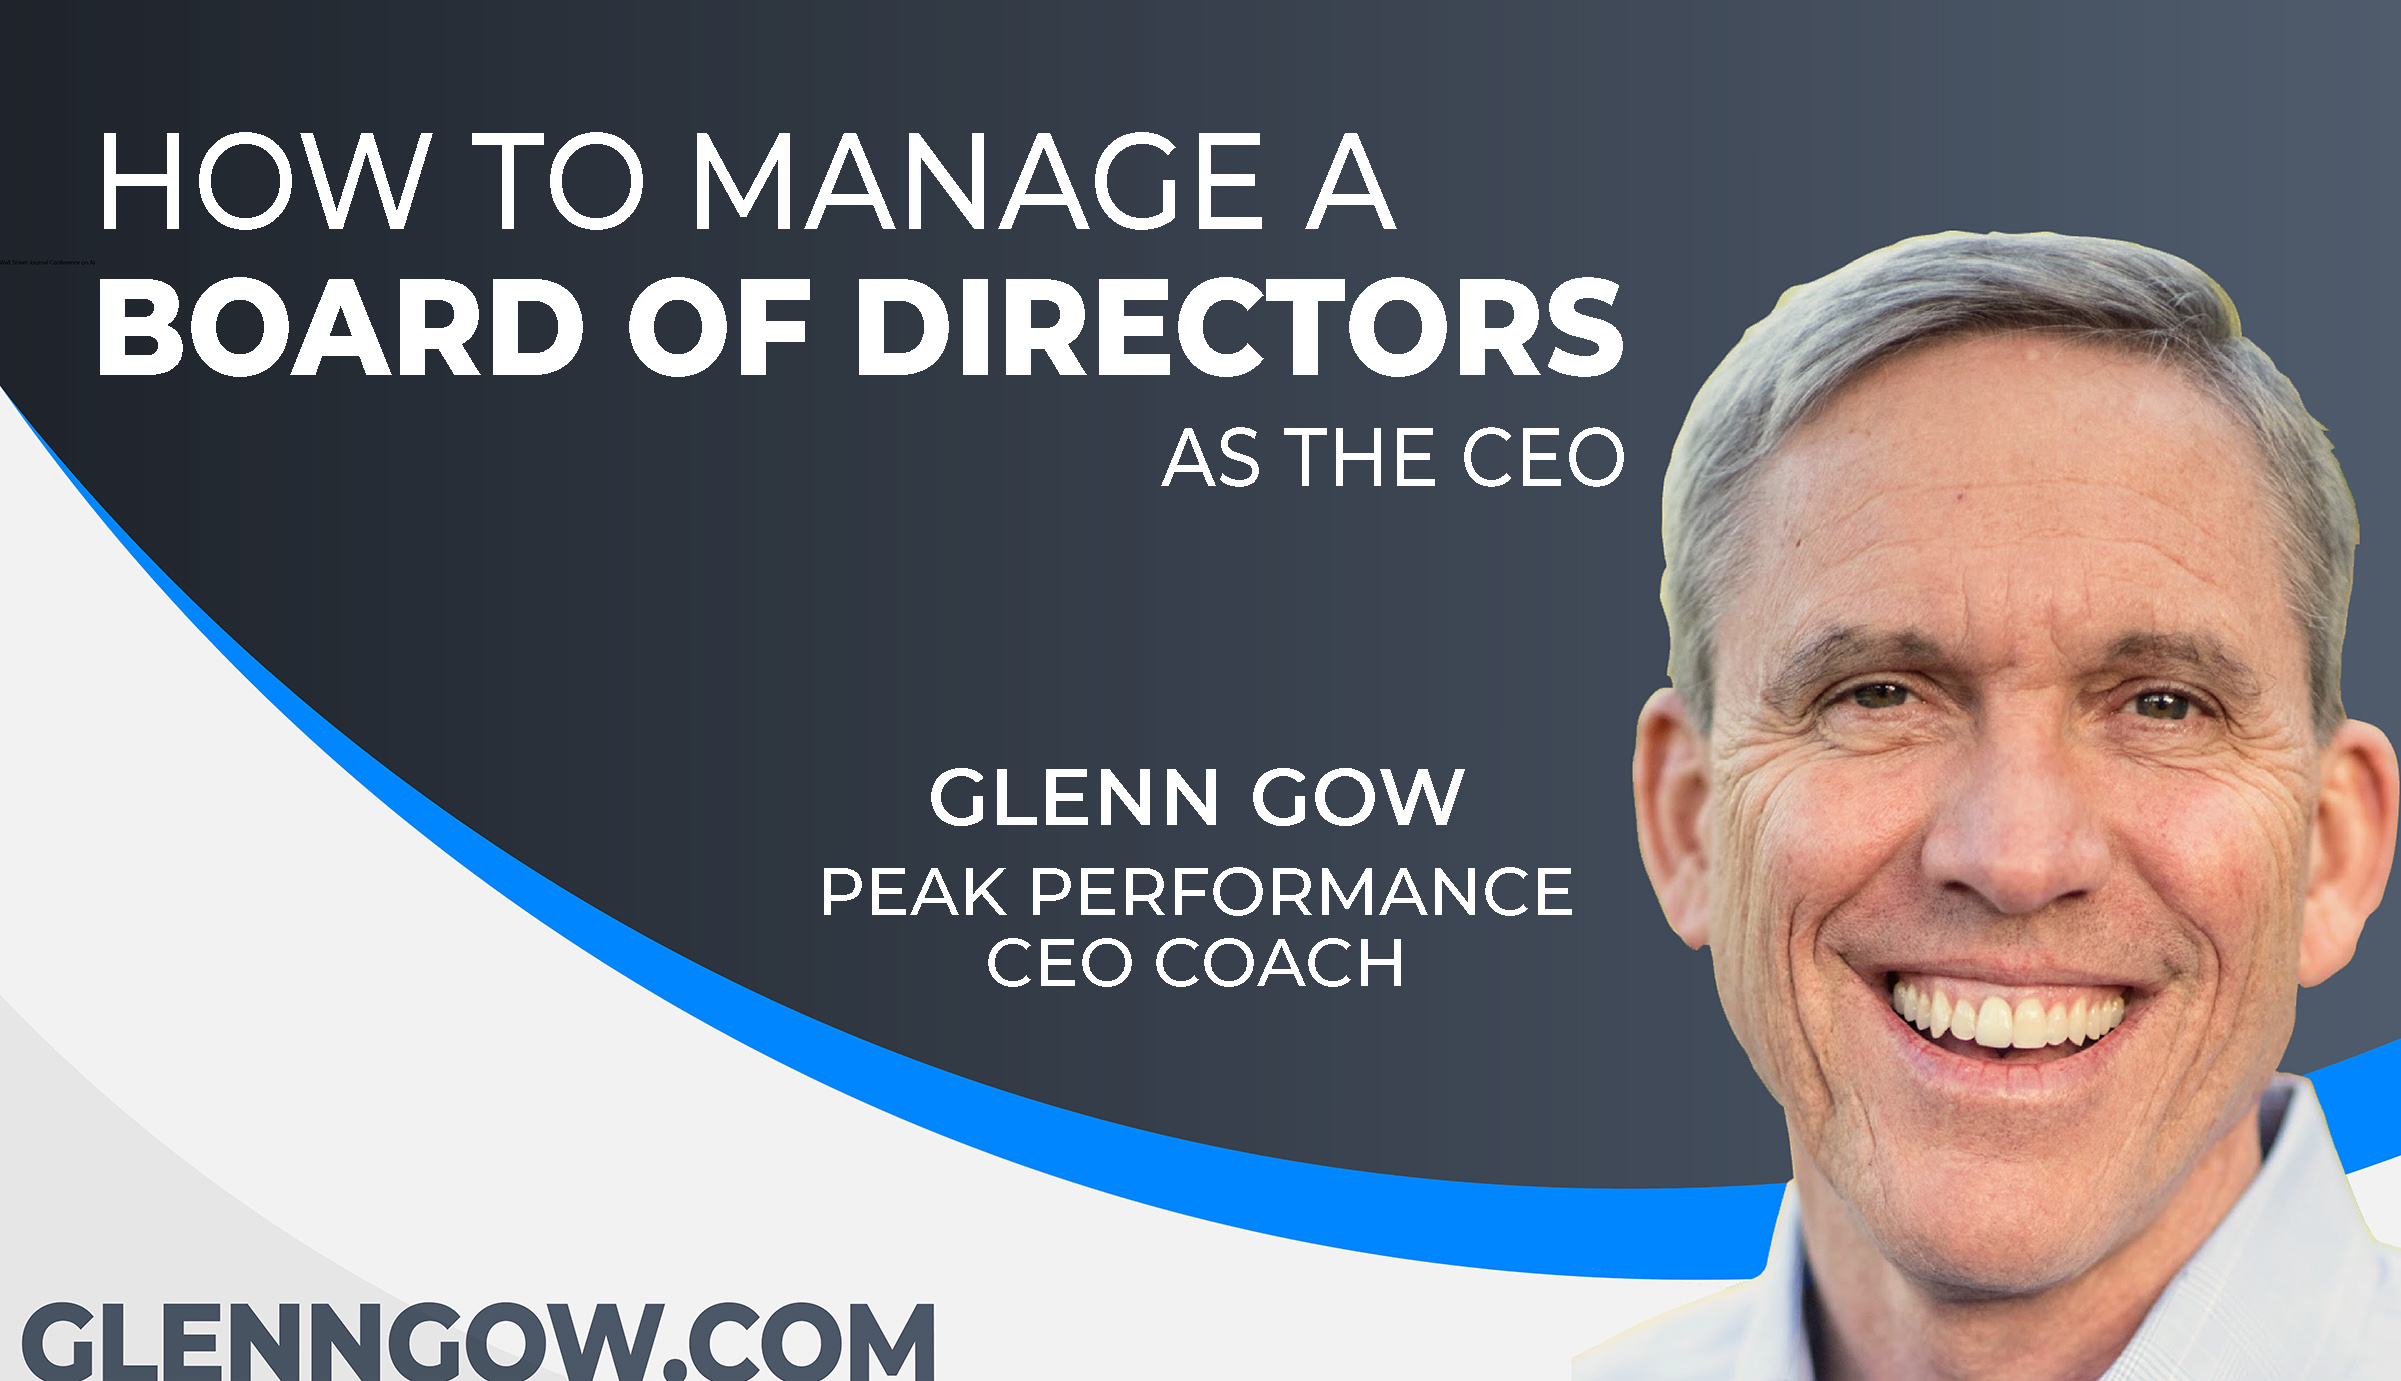 How to Manage a Board of Directors as the CEO